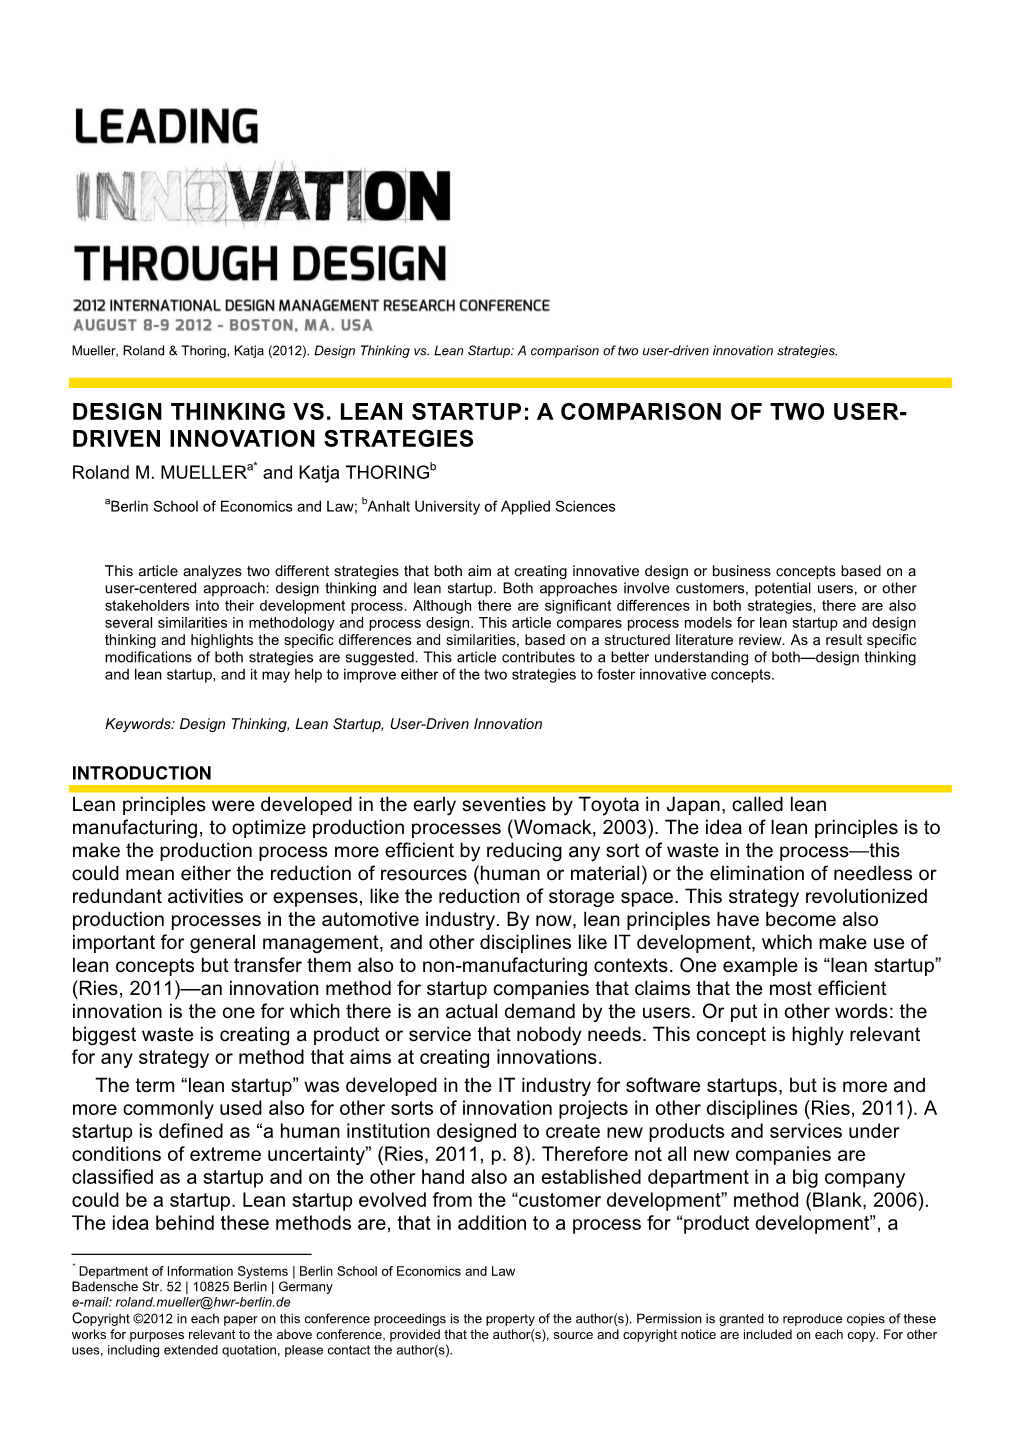 Design Thinking Vs. Lean Startup: a Comparison of Two User-Driven Innovation Strategies